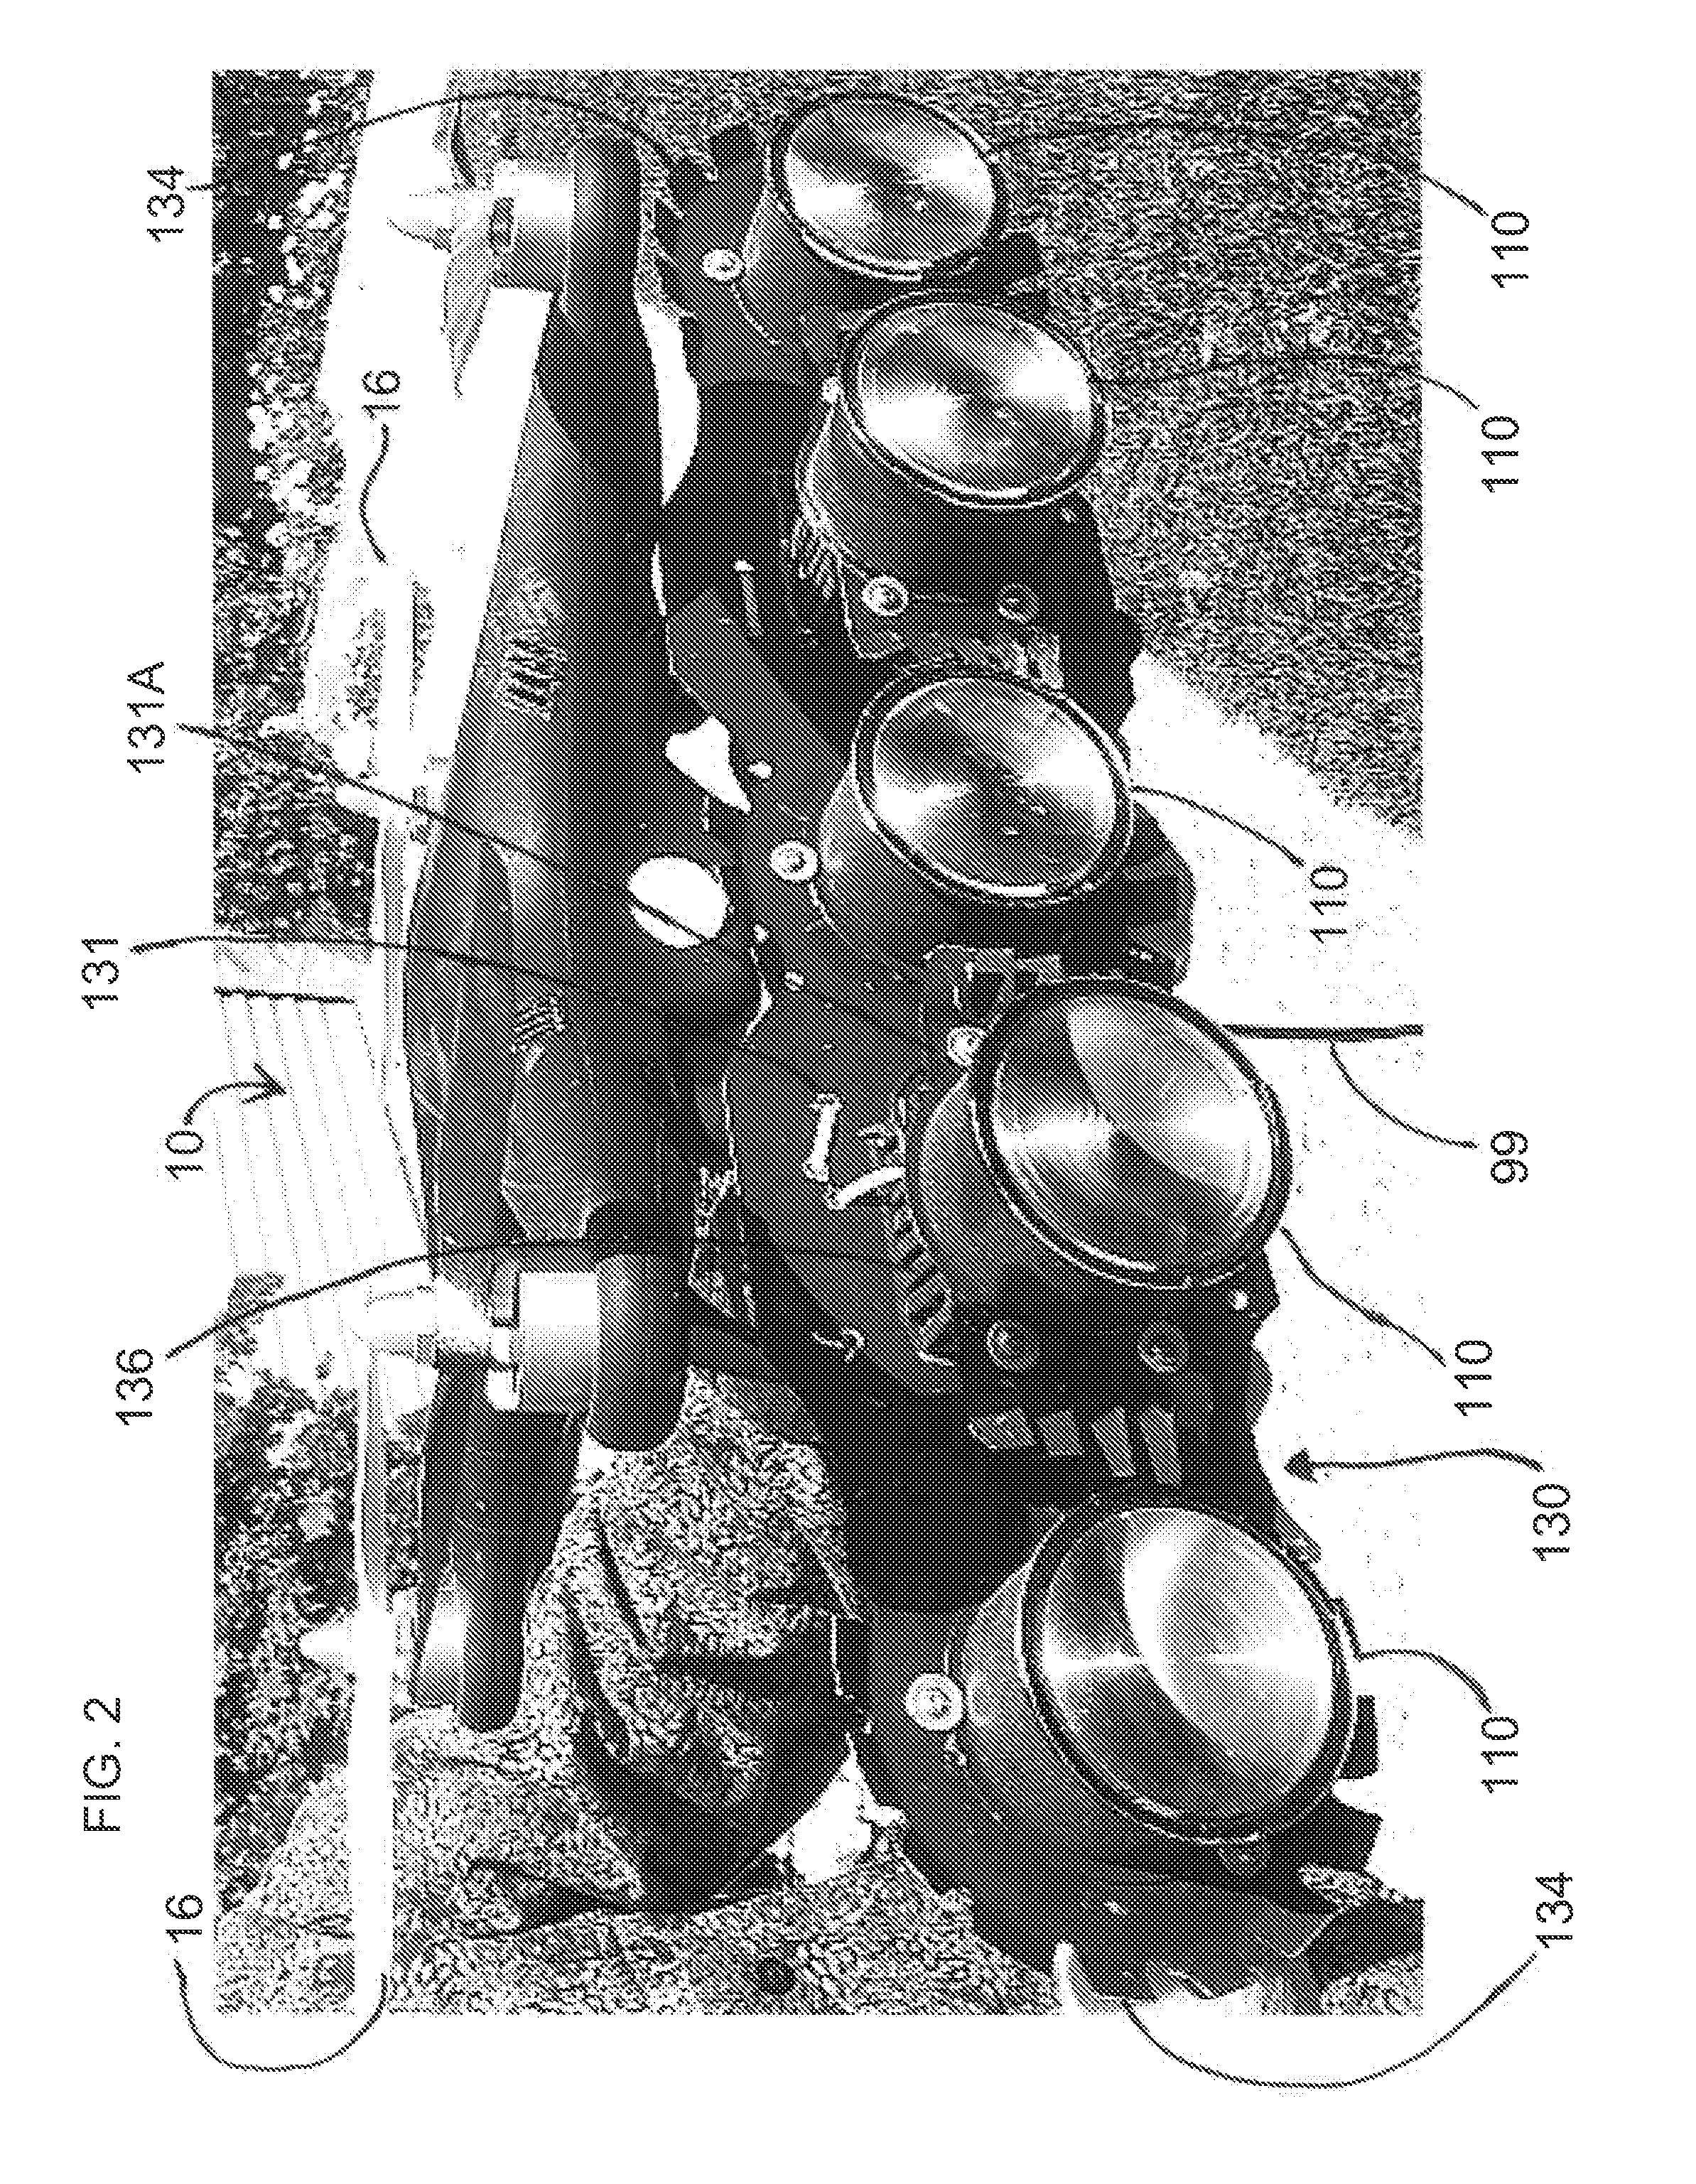 Unmanned Aerial Vehicle With Lighting and Cooling Therefor